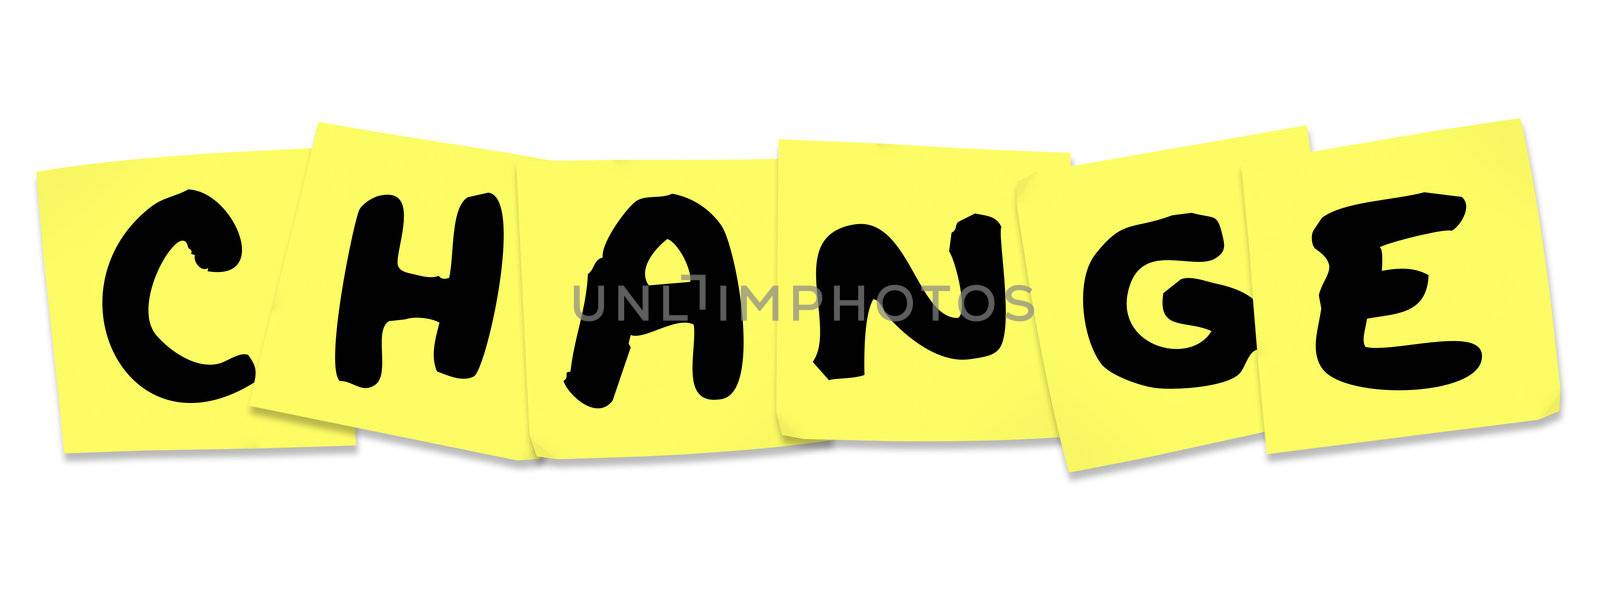 Change Word on Yellow Sticky Notes Adapt Improve by iQoncept